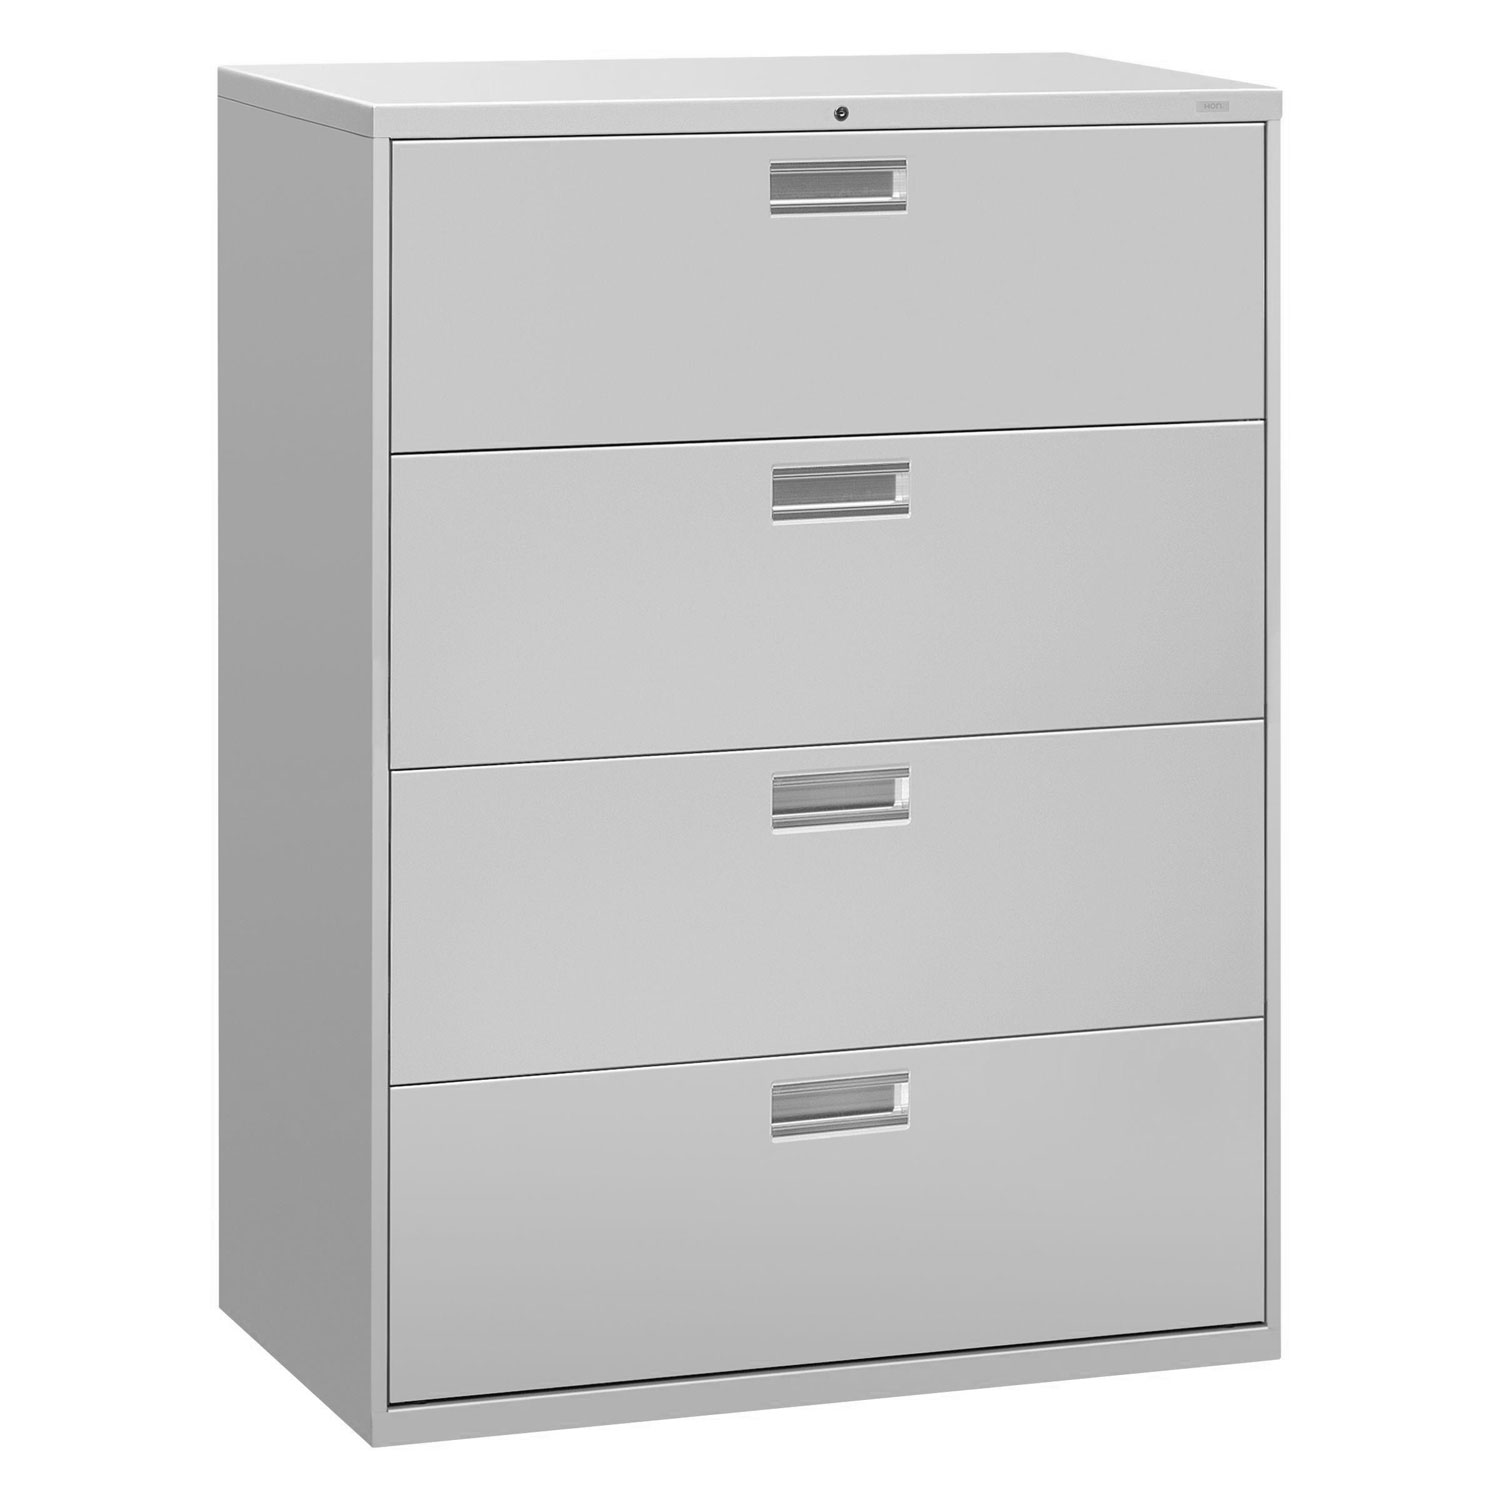 600 Series Four-Drawer Lateral File, 42w x 18d x 52 1/2h, Light Gray